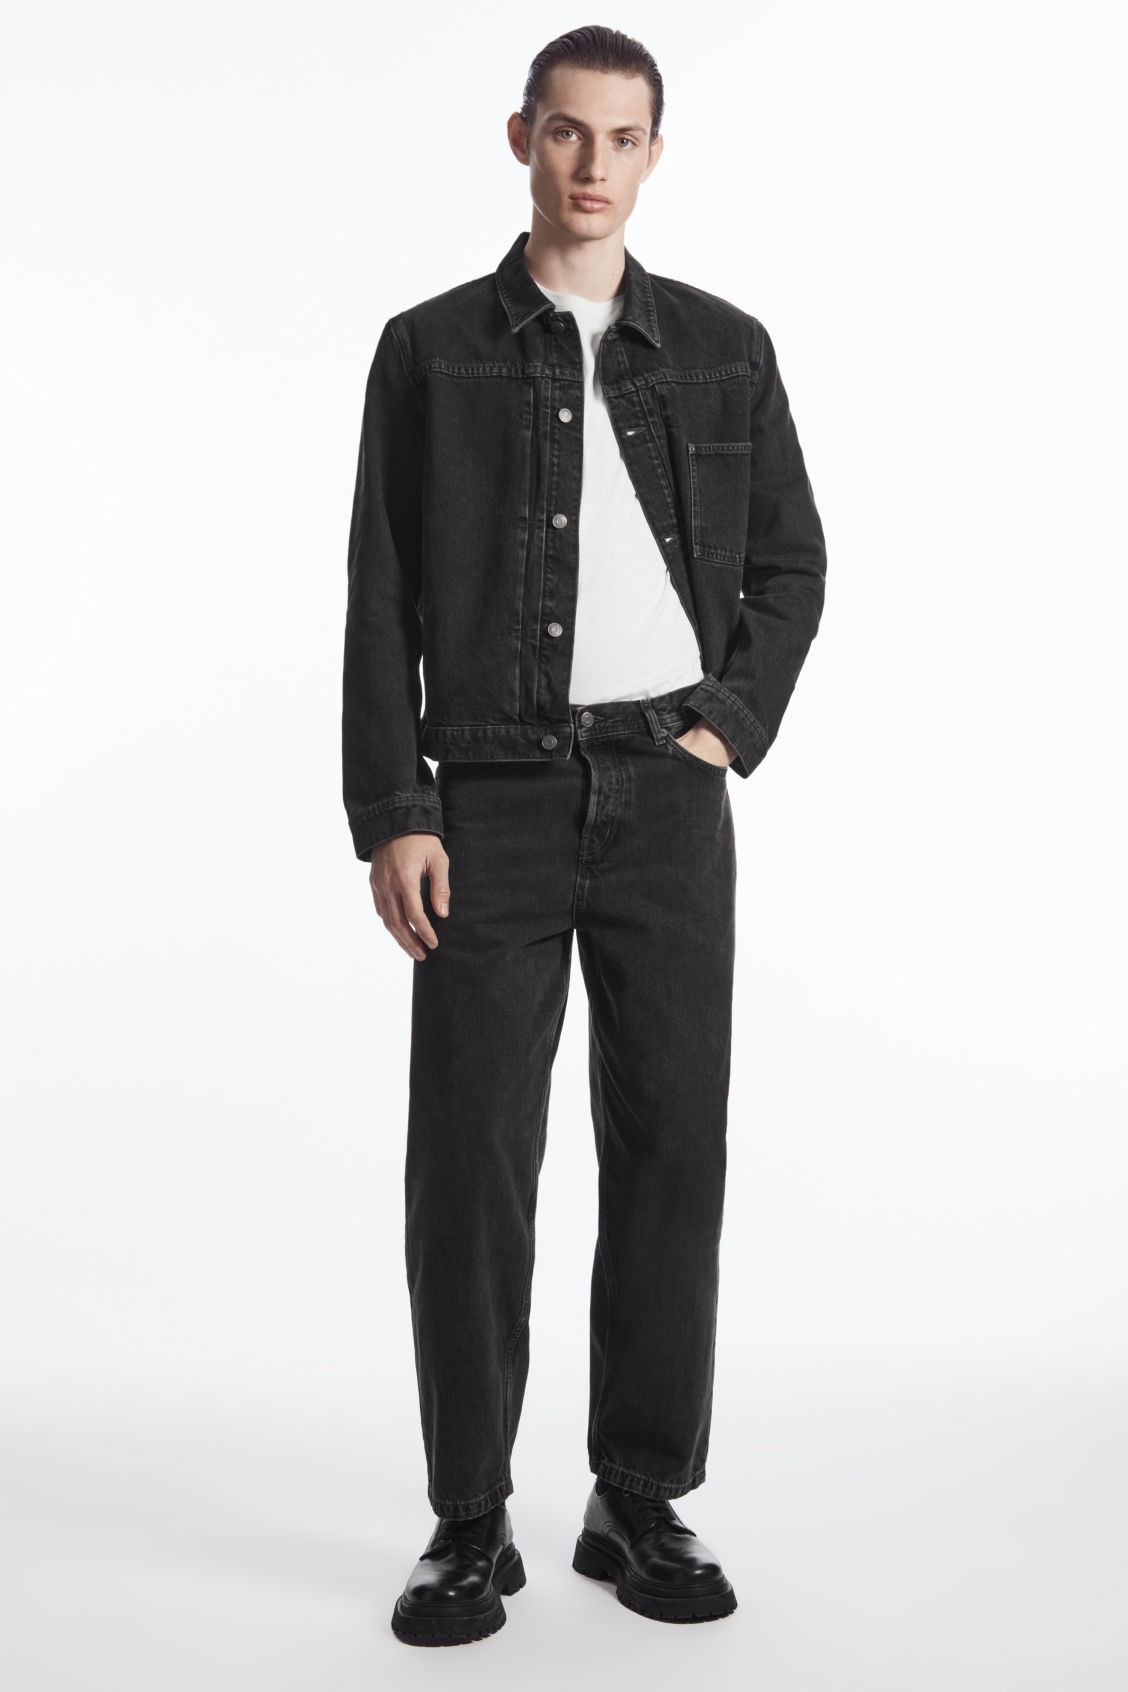 DOME JEANS - STRAIGHT/ANKLE LENGTH